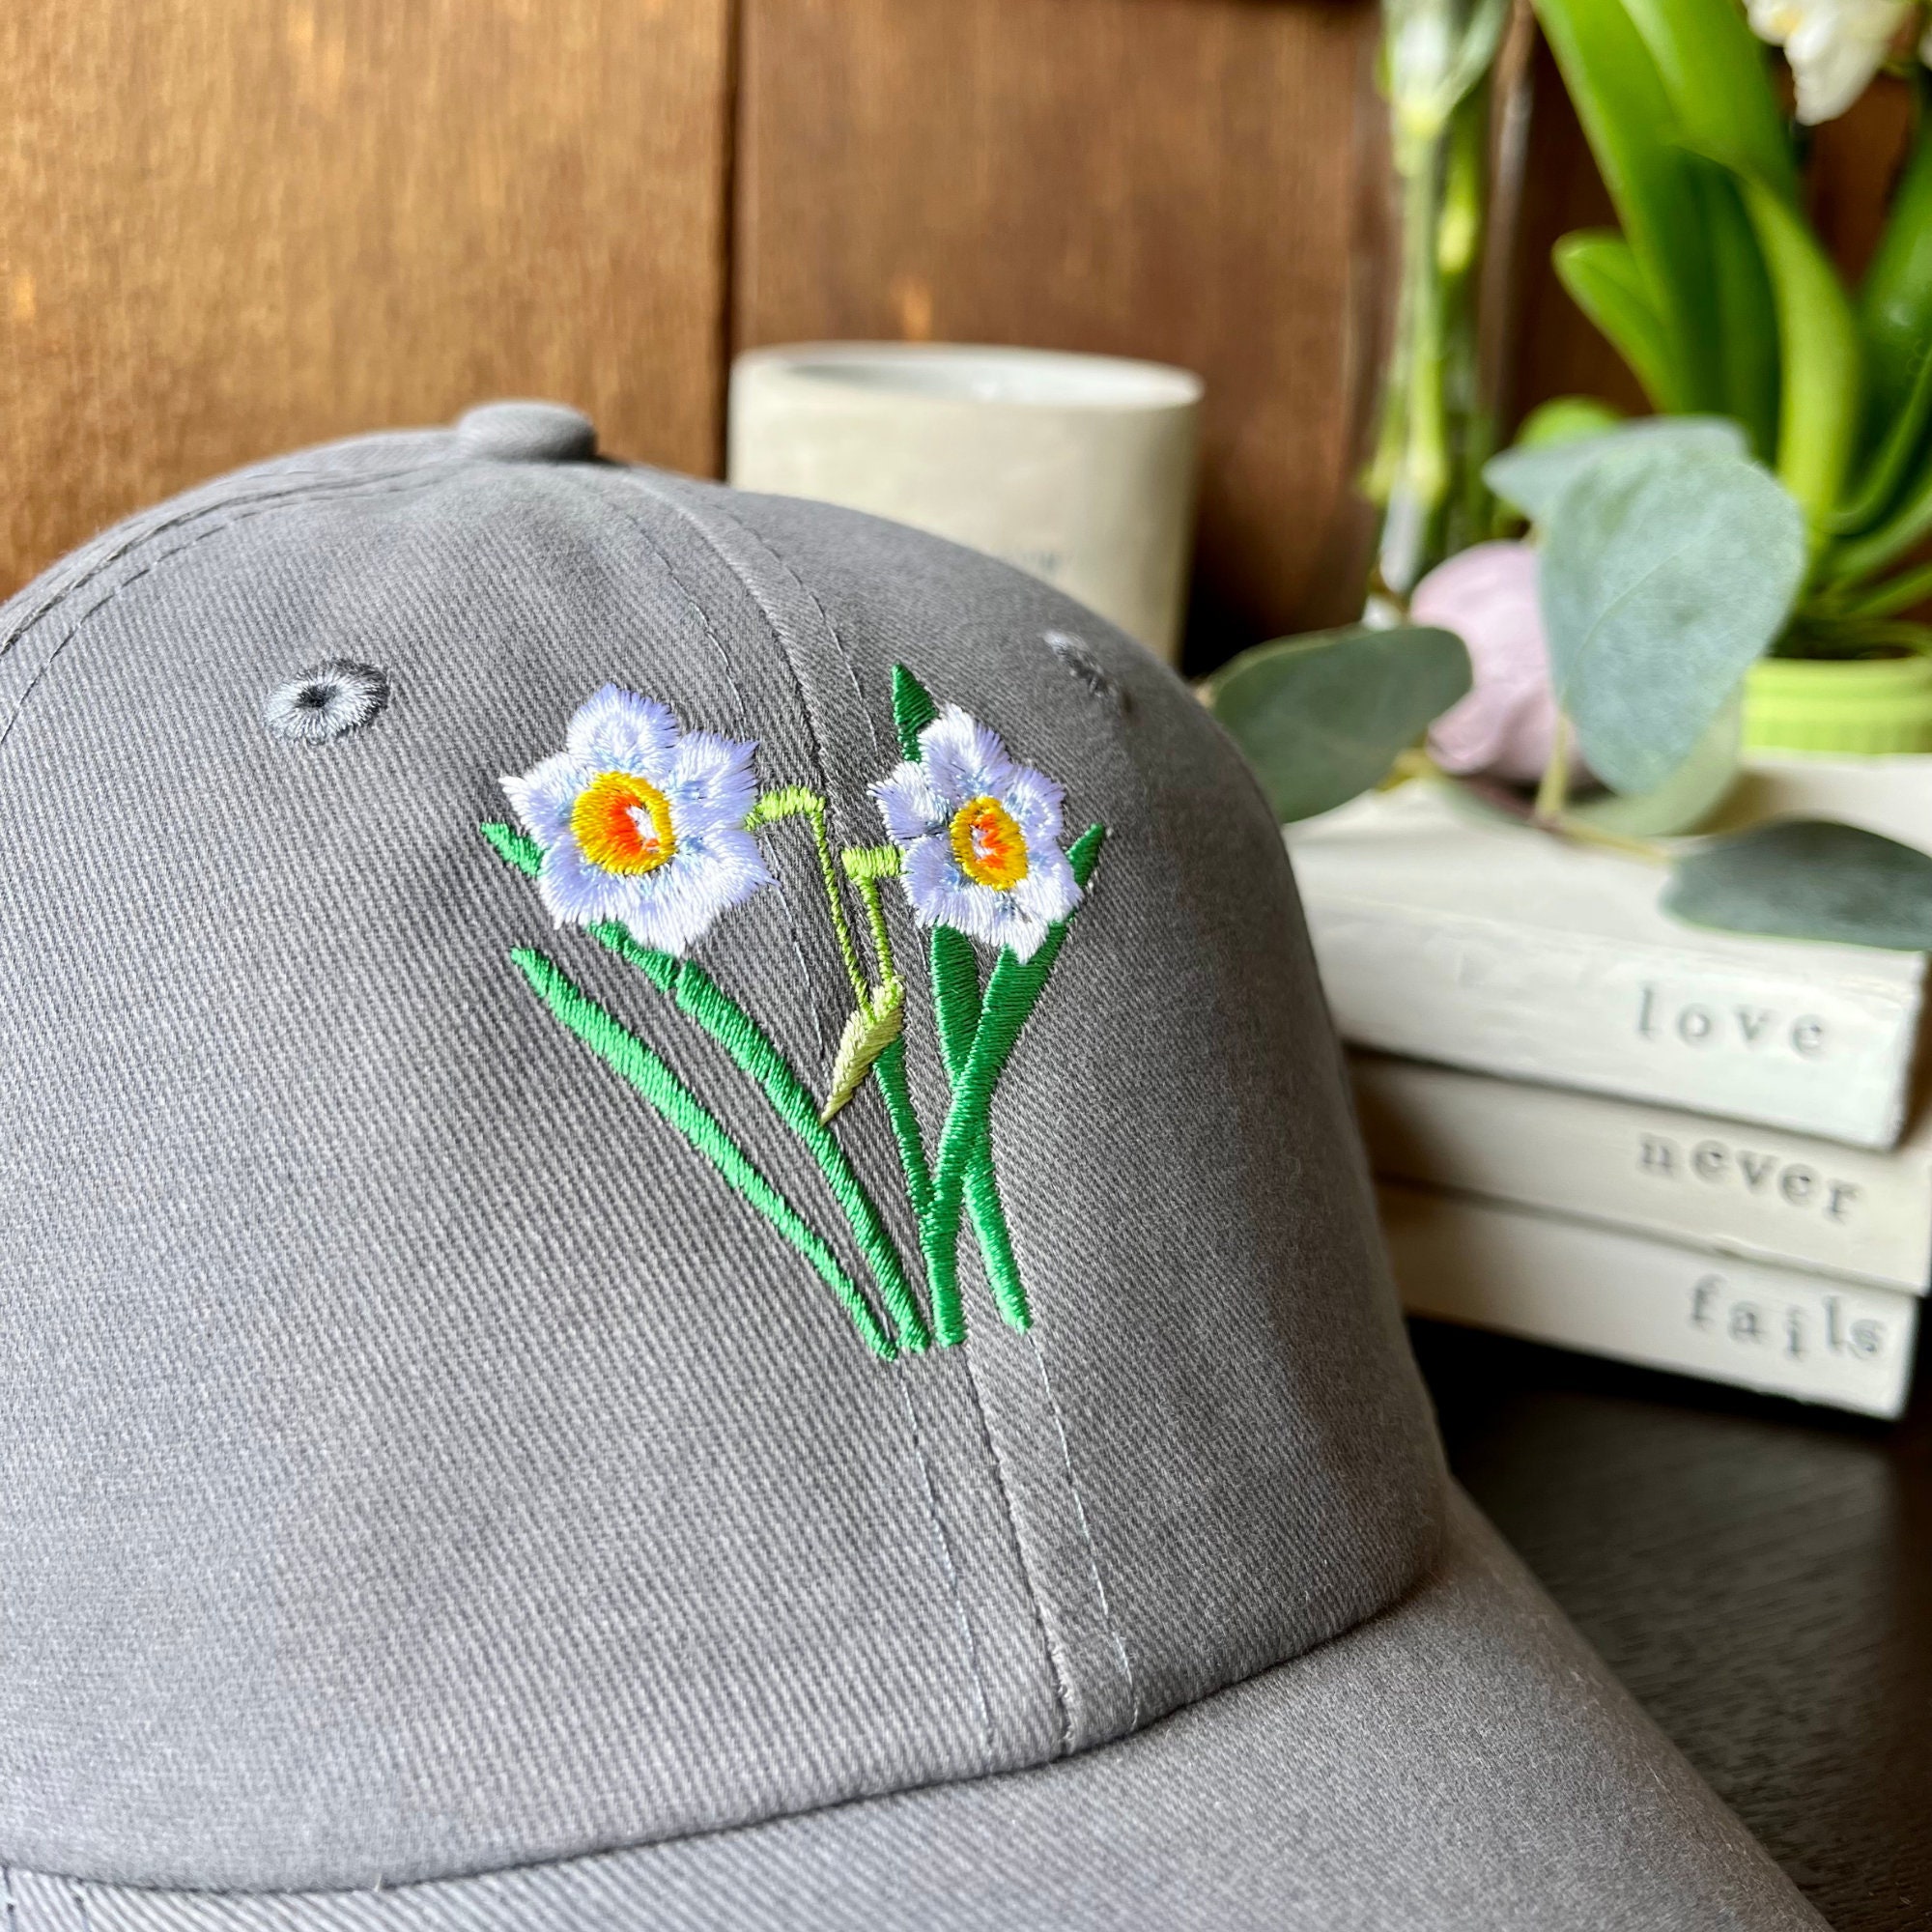 Travel Hat - Daffodil Yellow with White H!